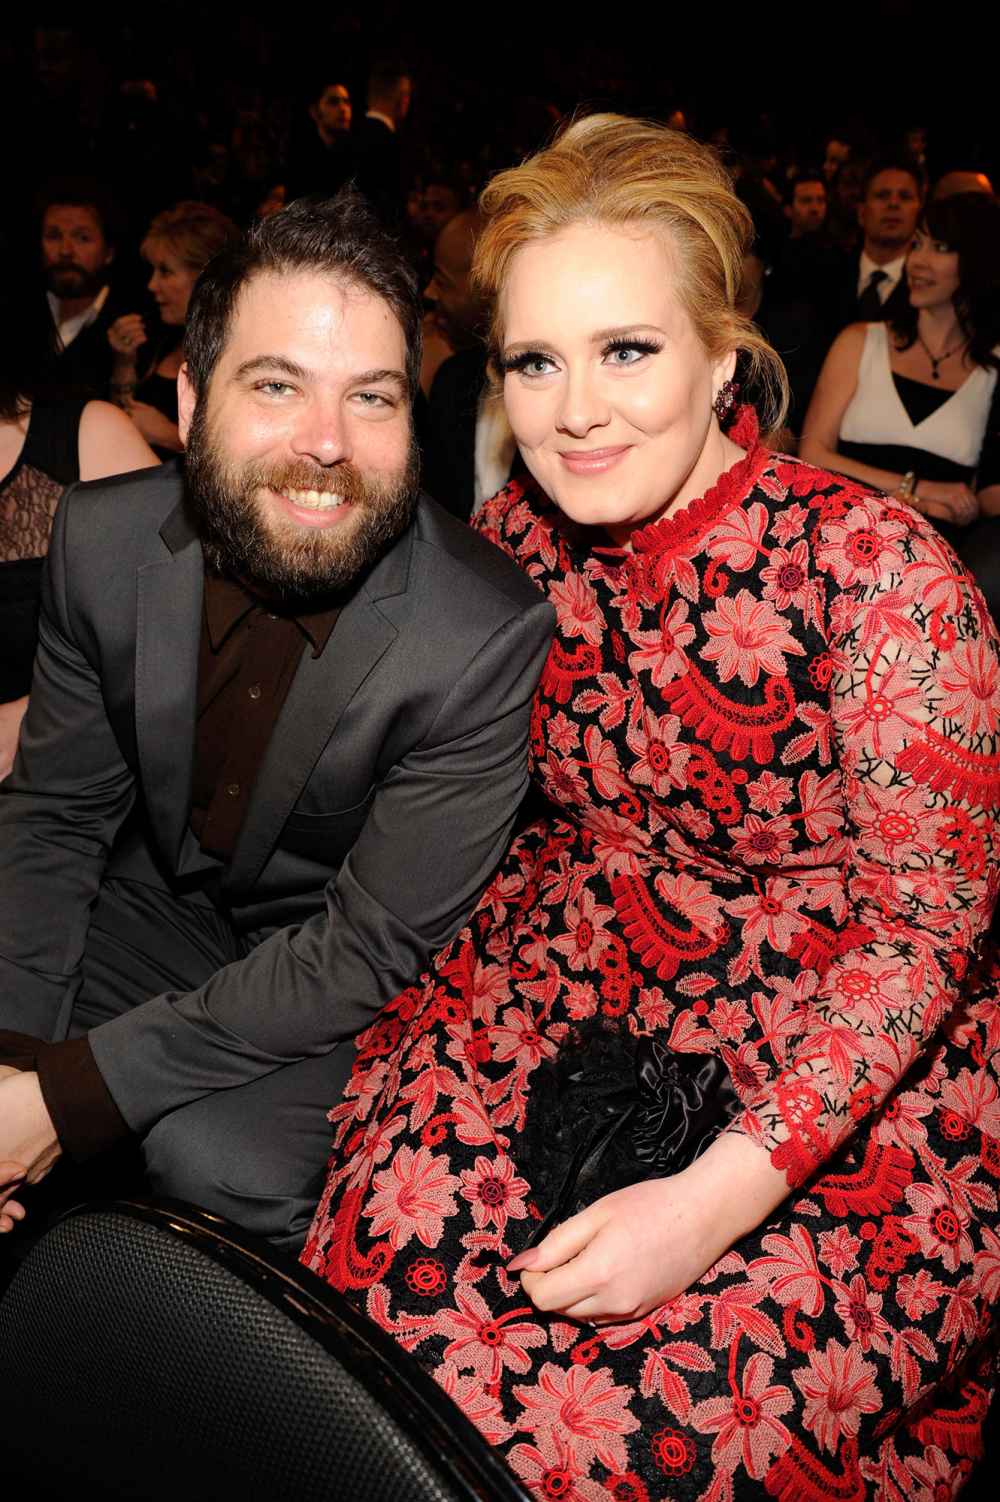 Adele in a Red Flower Dress and Simon Konecki